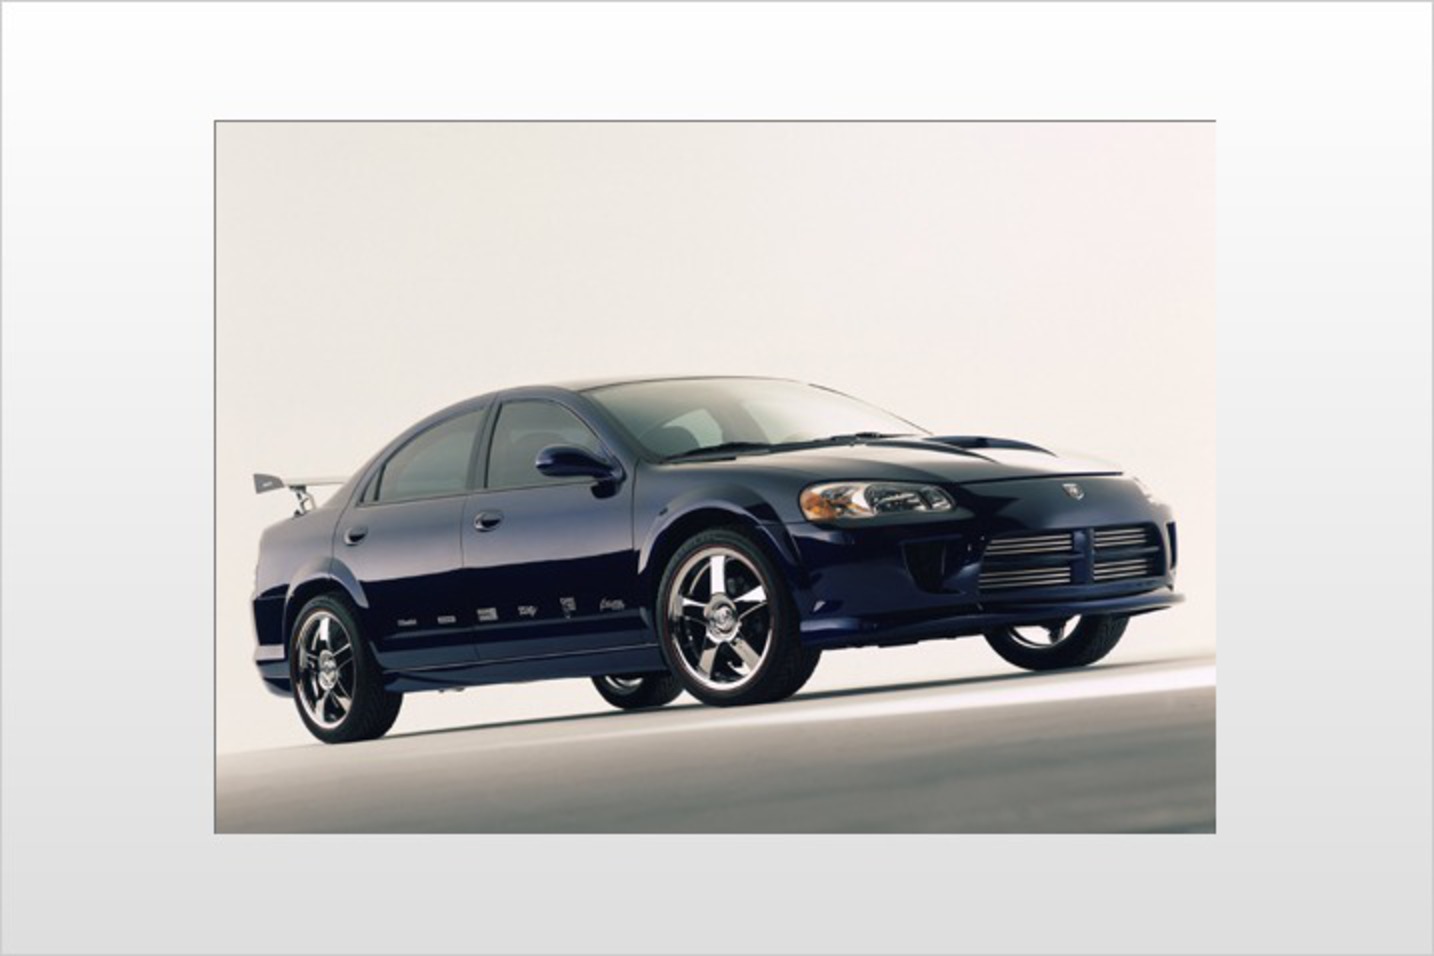 Dodge Stratus hearse. View Download Wallpaper. 717x478. Comments